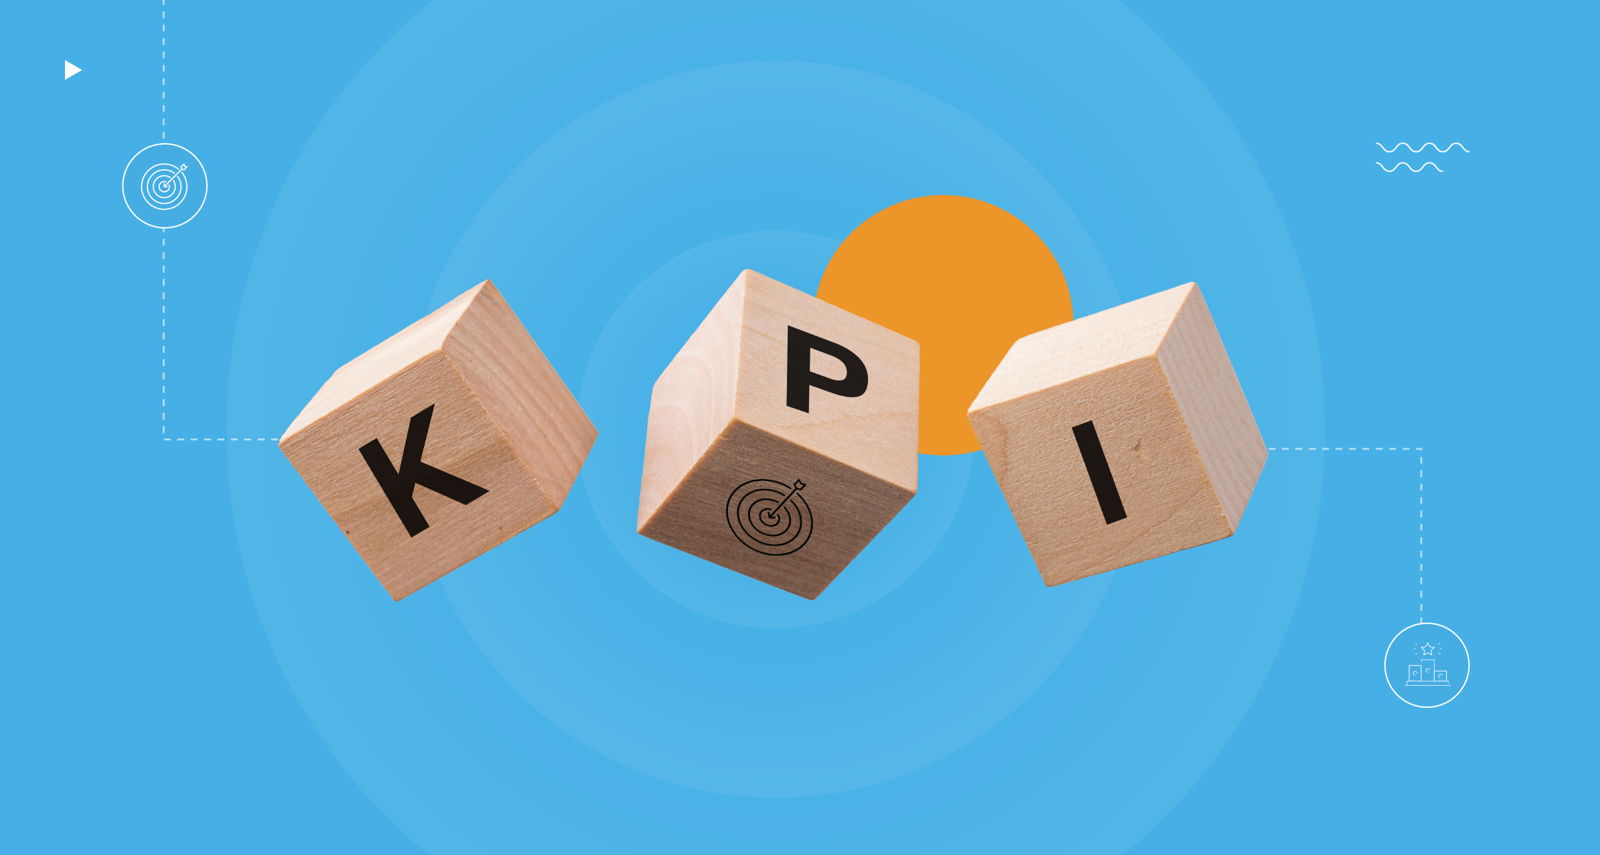 Prepaid KPIs: What Can They Tell You?